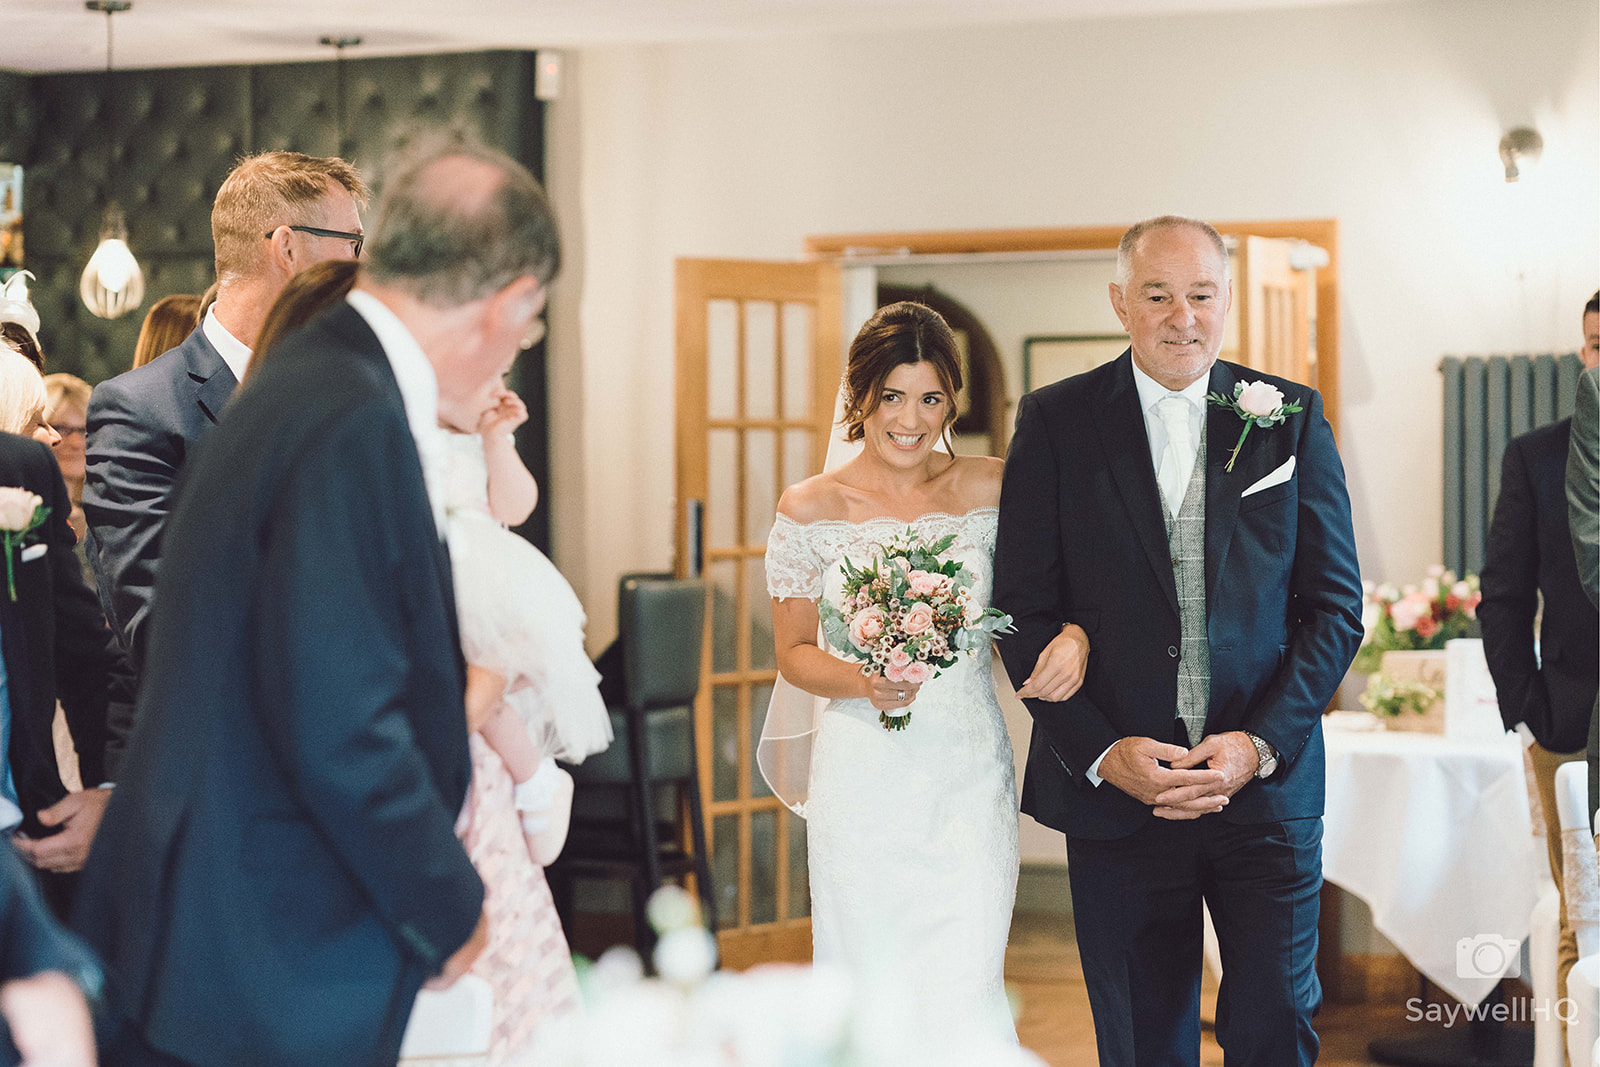 The Chequers Inn Wedding Photography - bride and her father walking down the wedding aisle